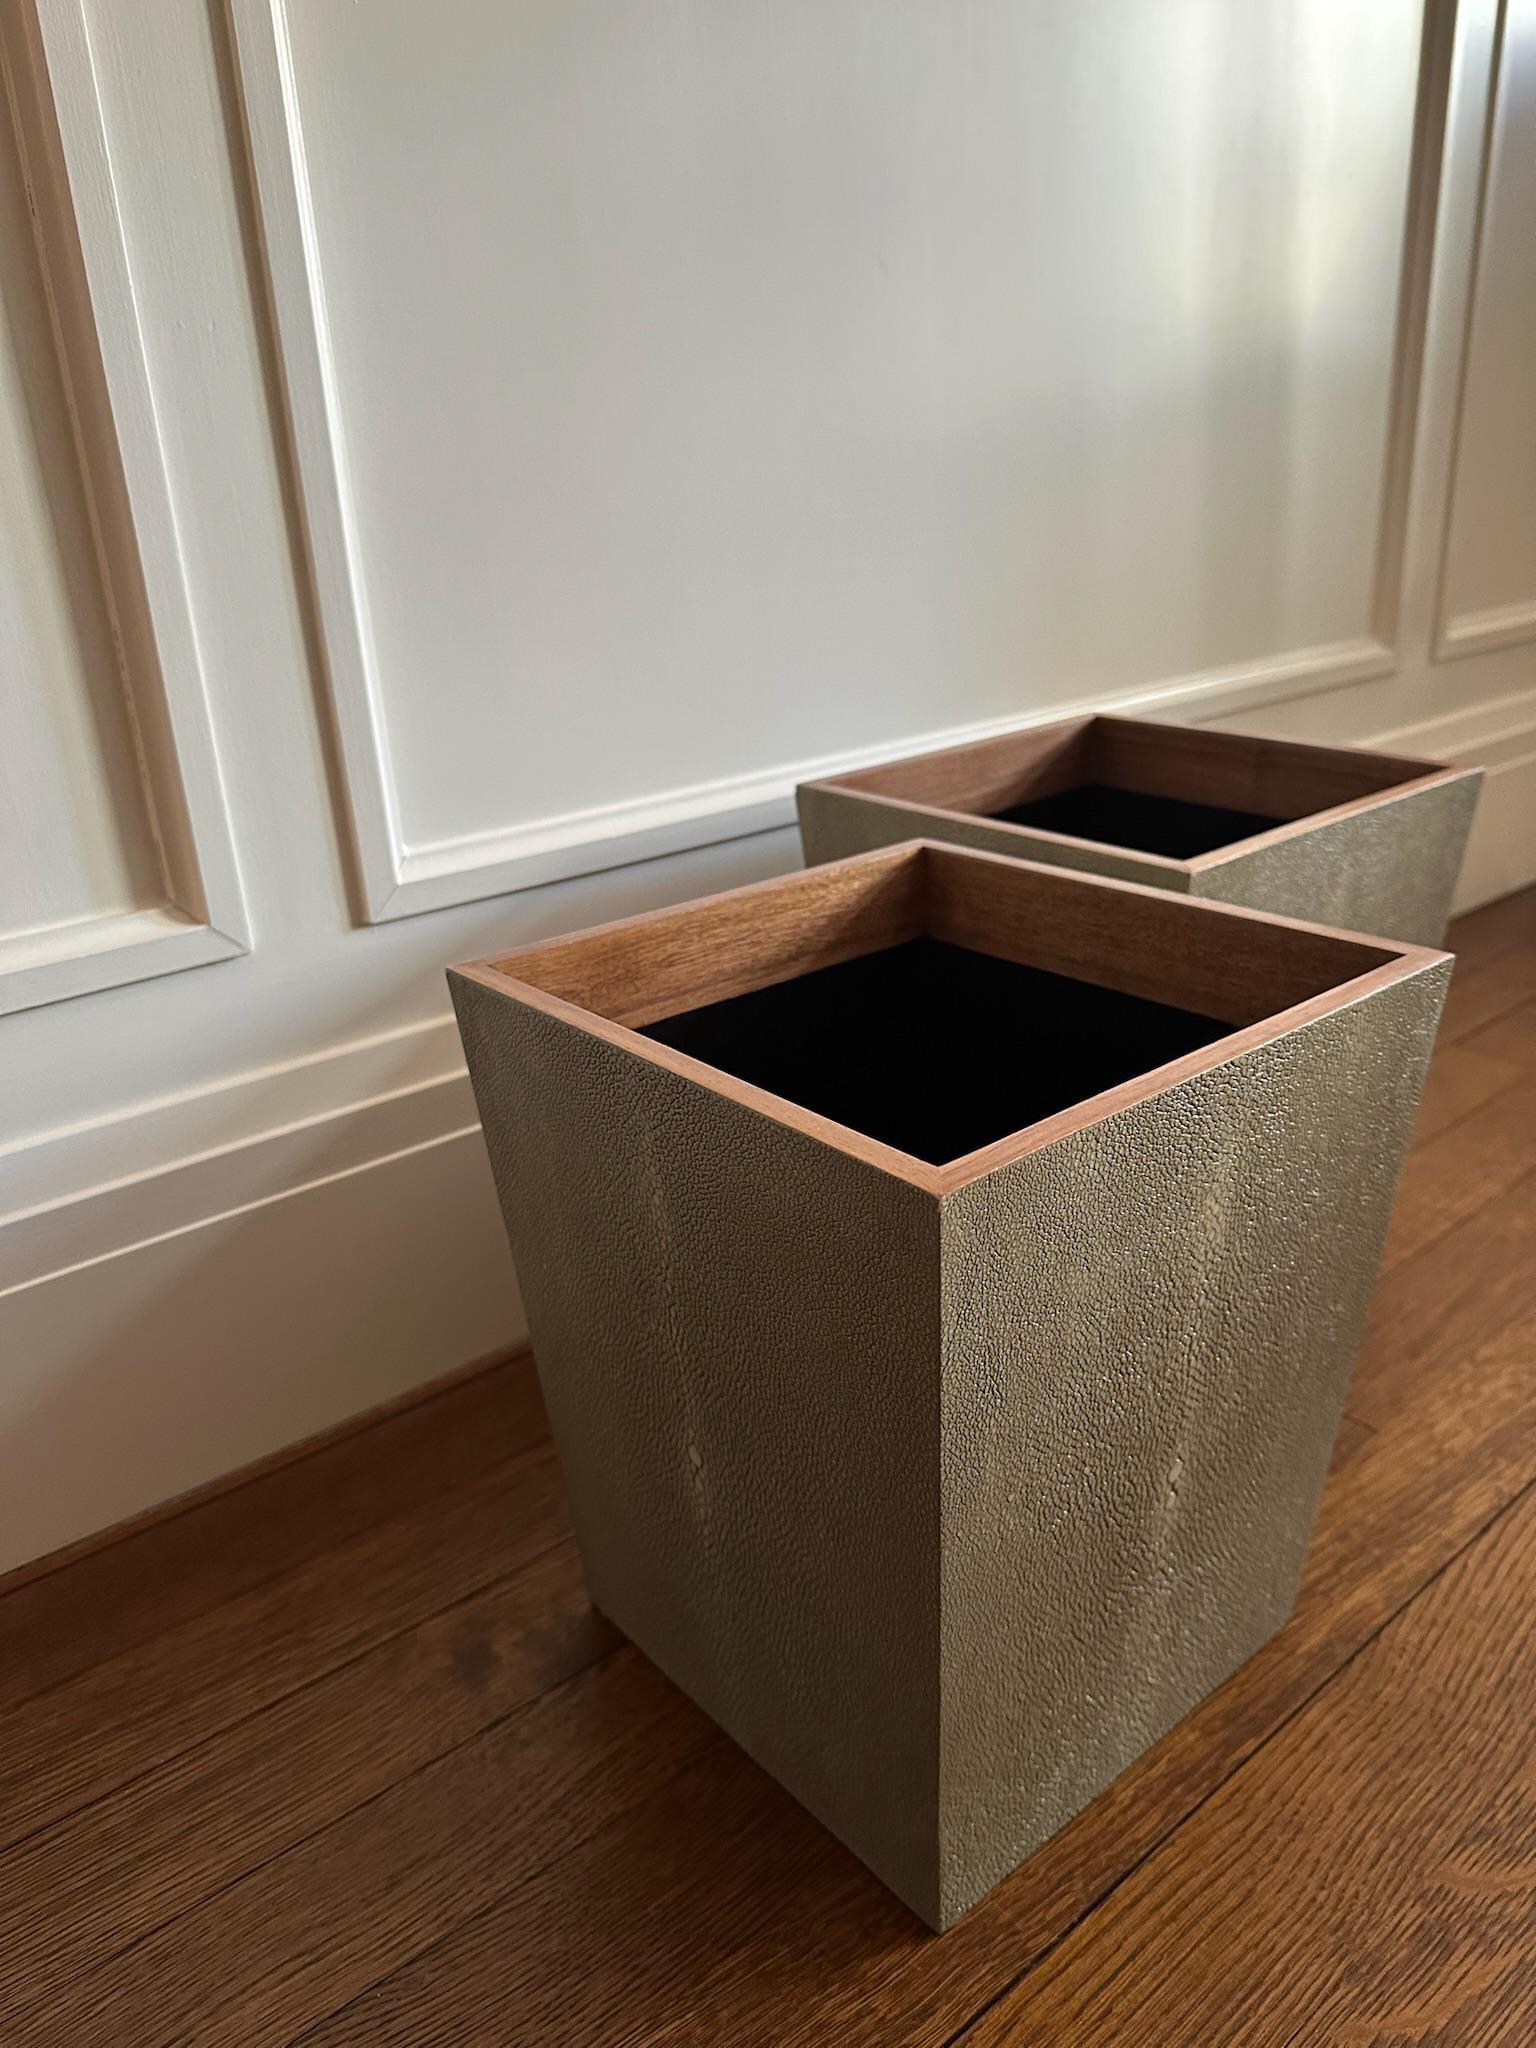 The outer sides of the wastebasket are beautifully crafted to mimic the natural eye pattern of shagreen, topped with a veneer trim. 2 wastebaskets available - priced separately but can be bought together.